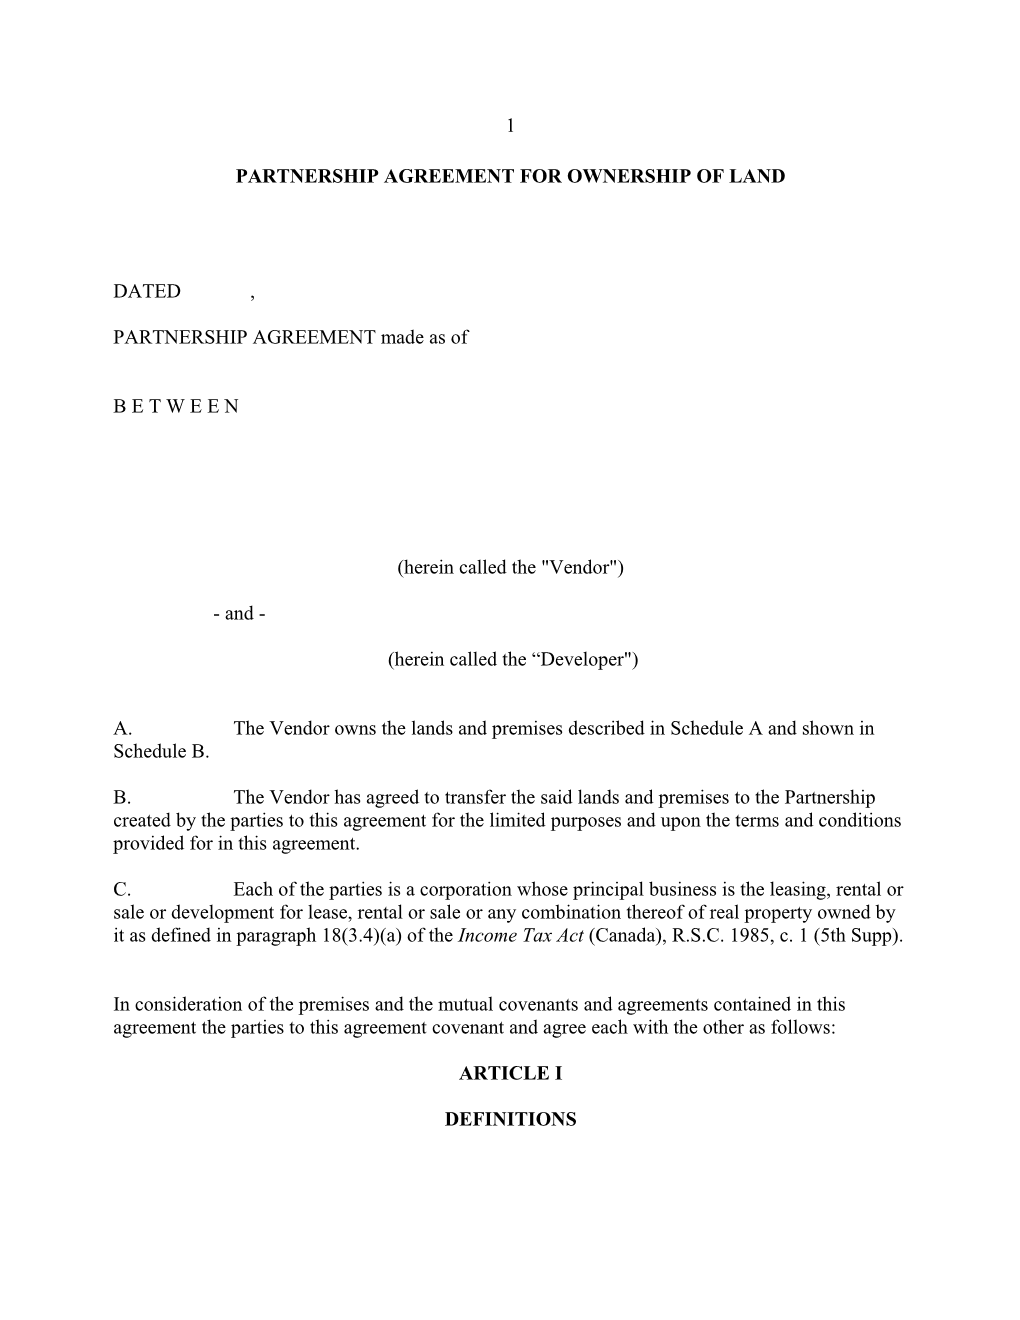 Partnership Agreement for Ownership of Land